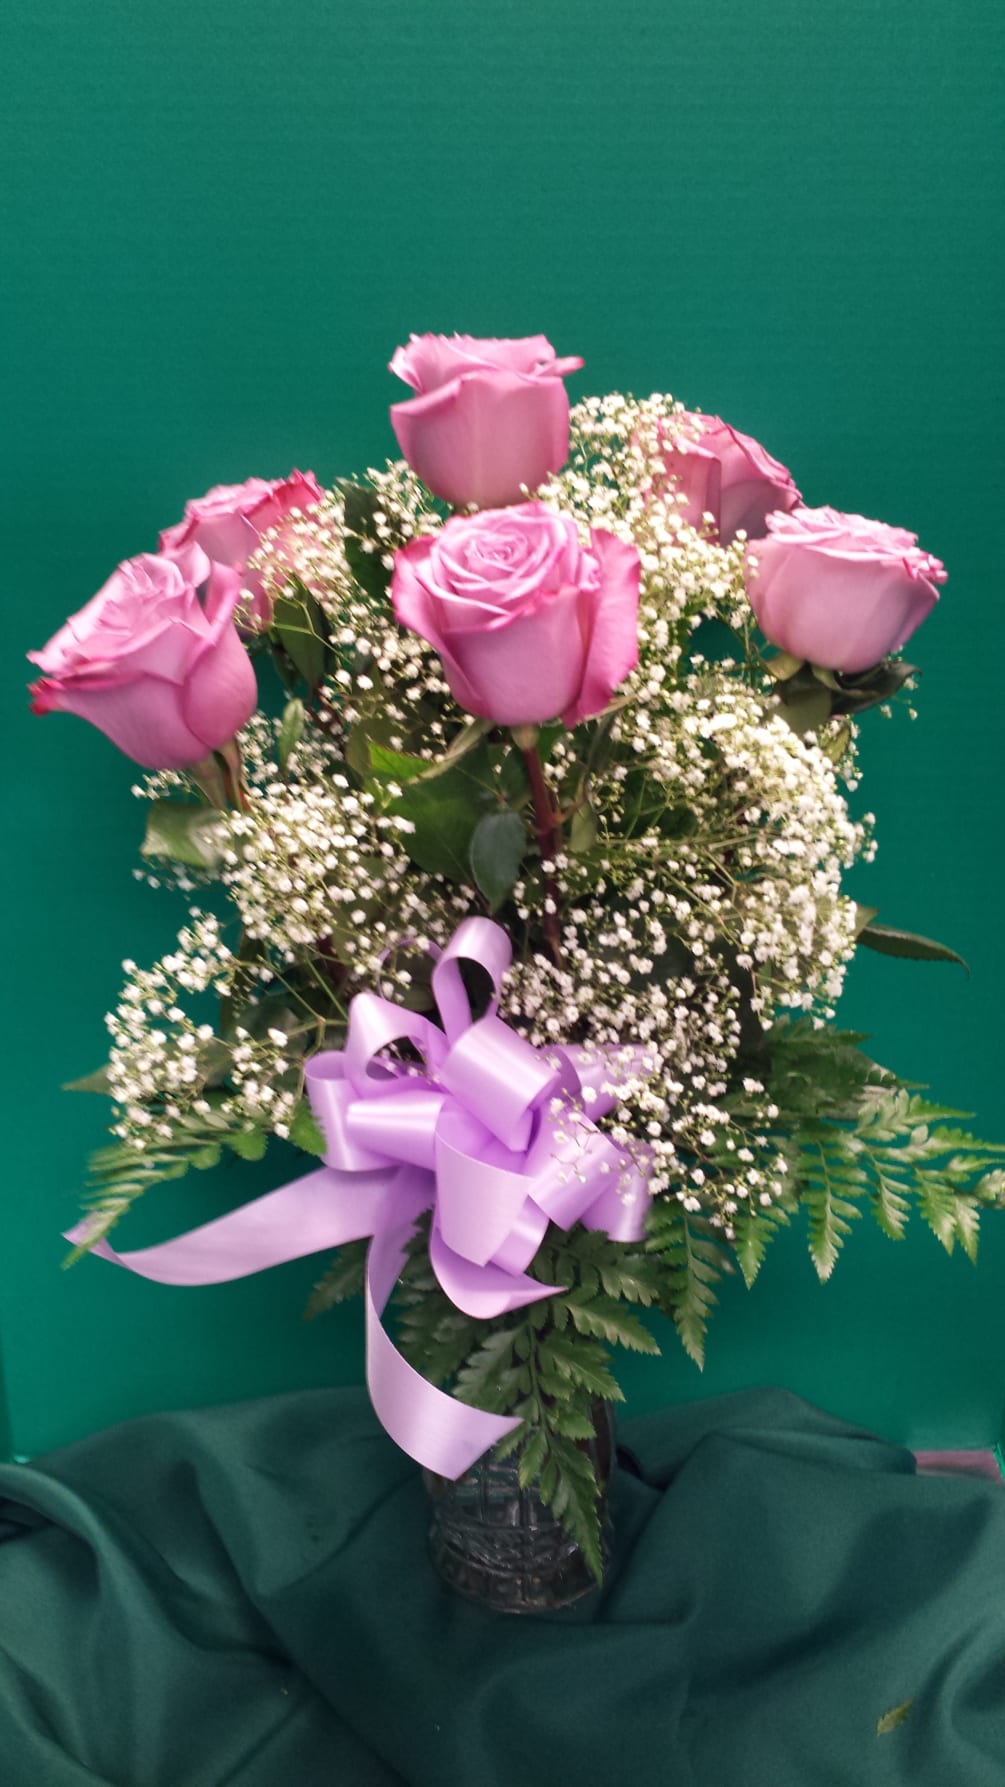 Six long stem roses arranged in a clear vase and accented with